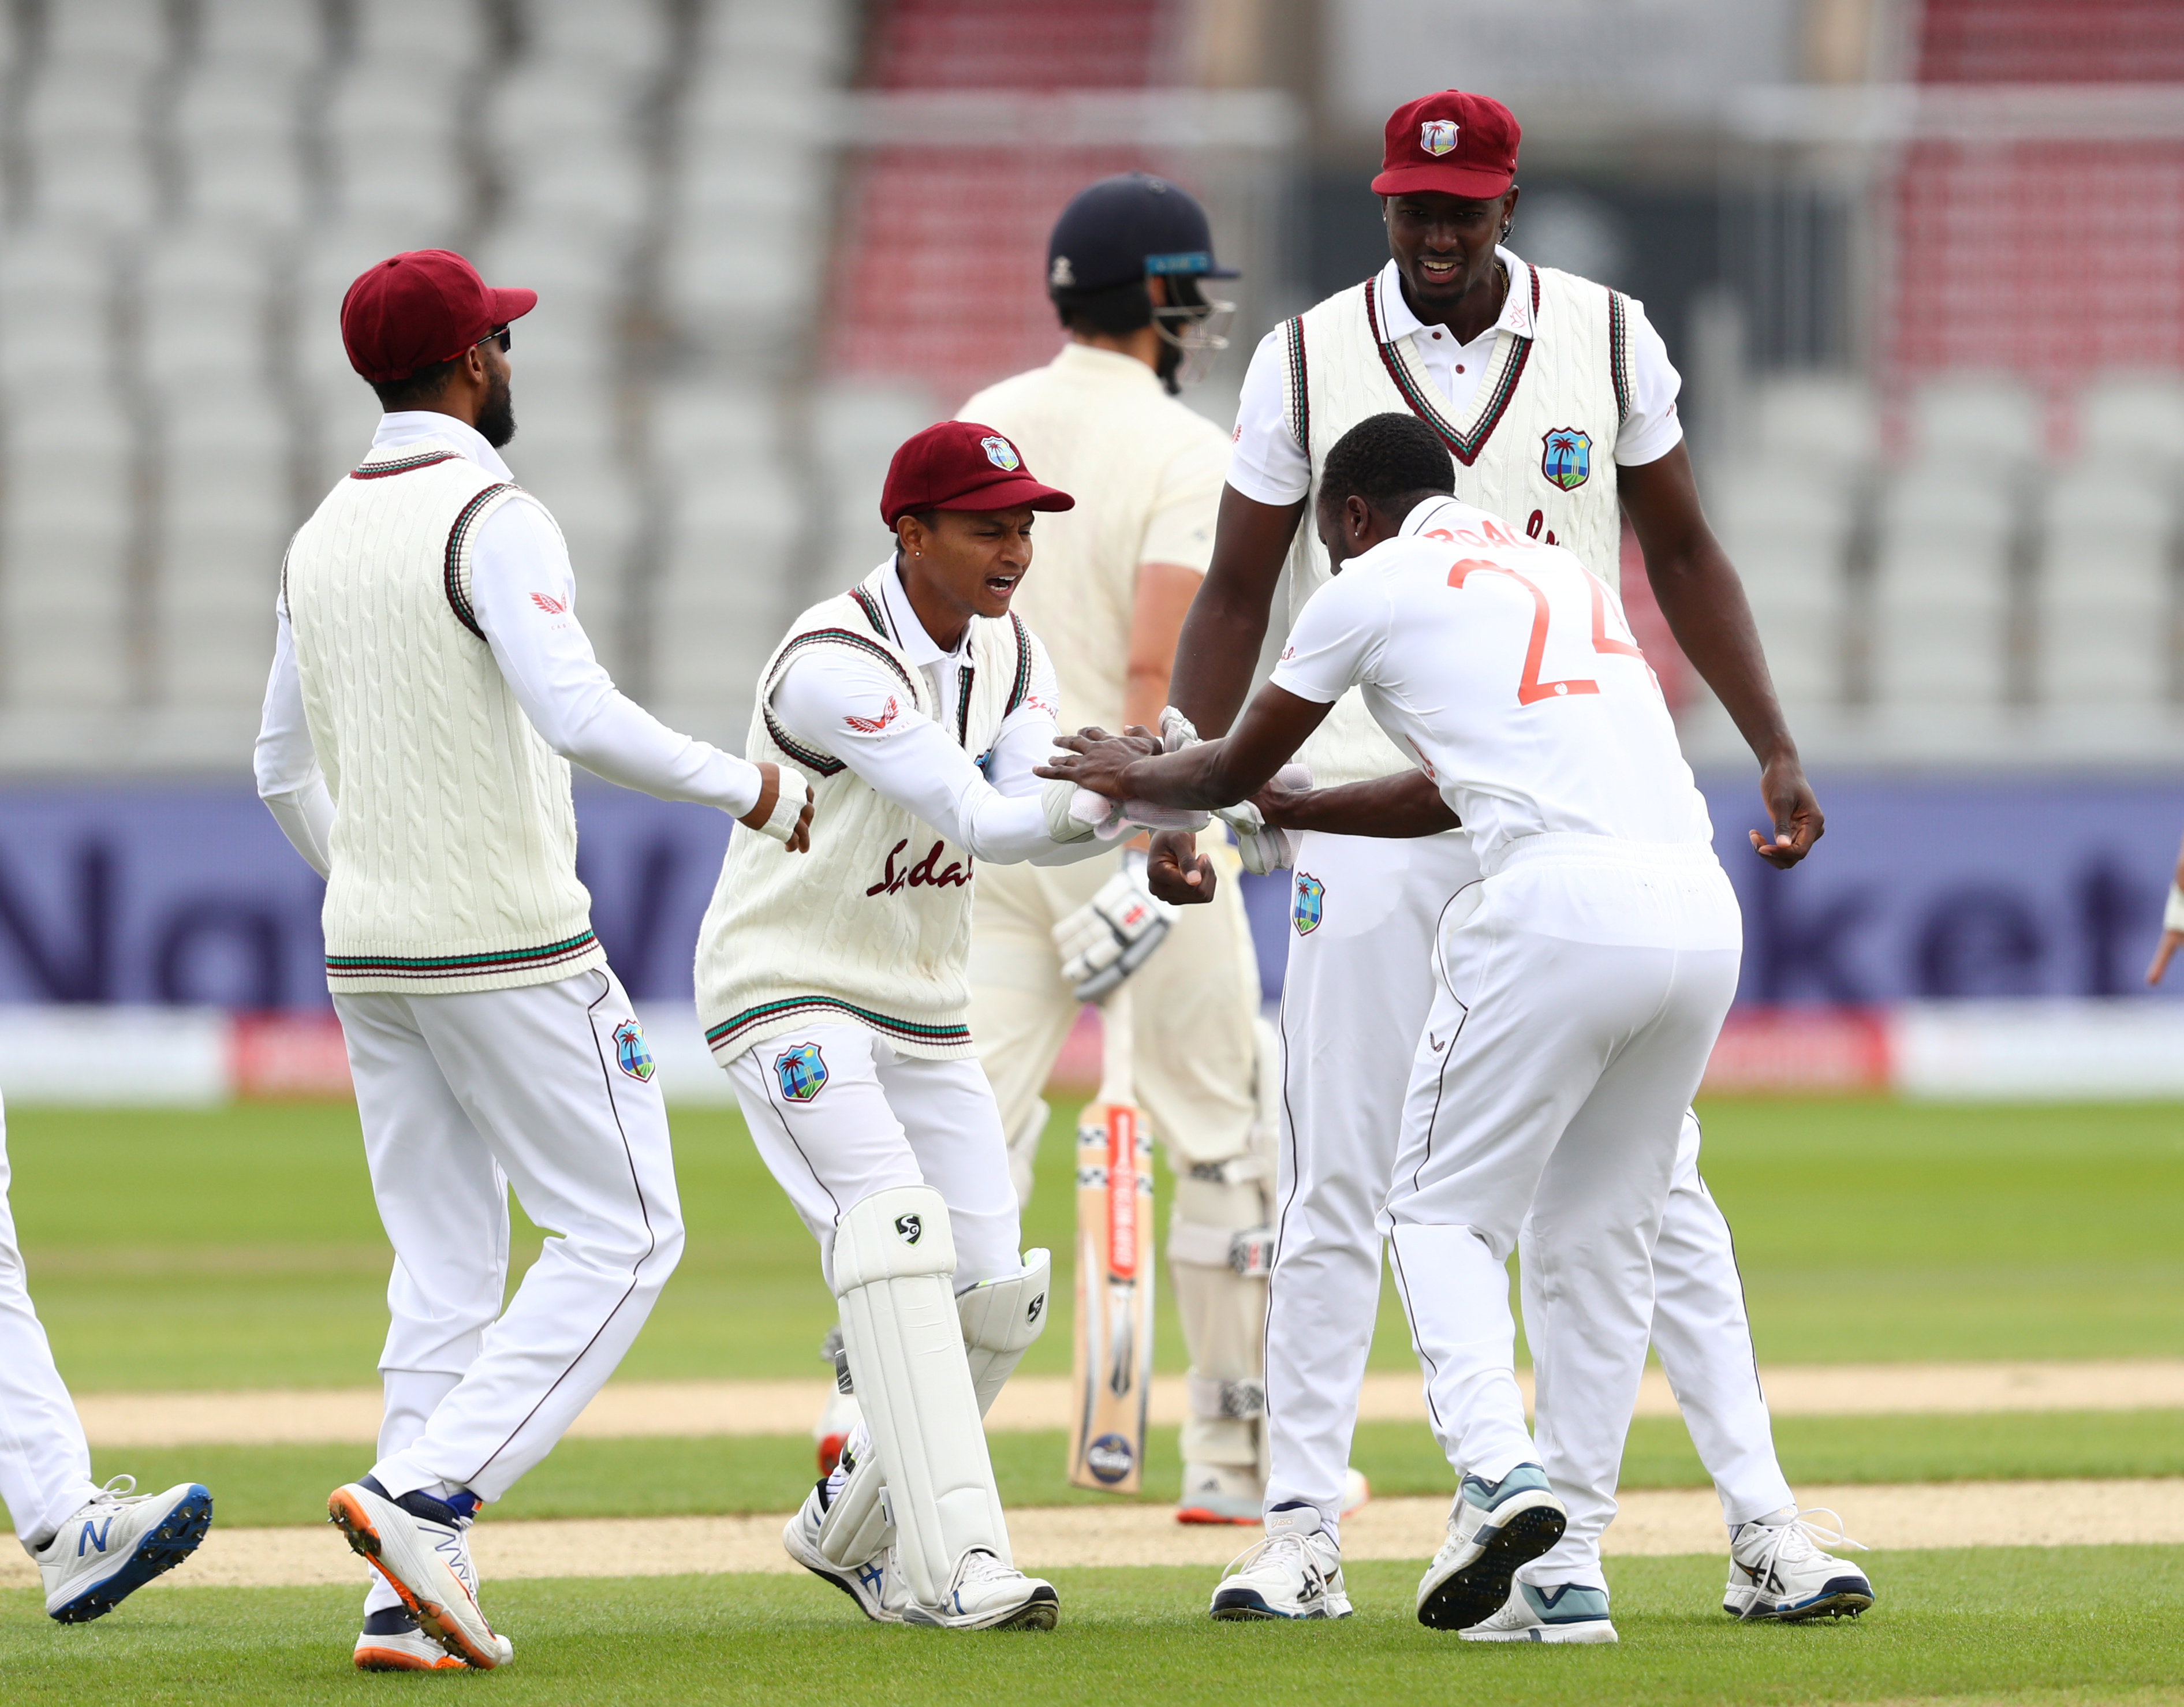 Unwanted record: With 6 ducks, Bangladesh out for 103 vs. West Indies in 1st Test